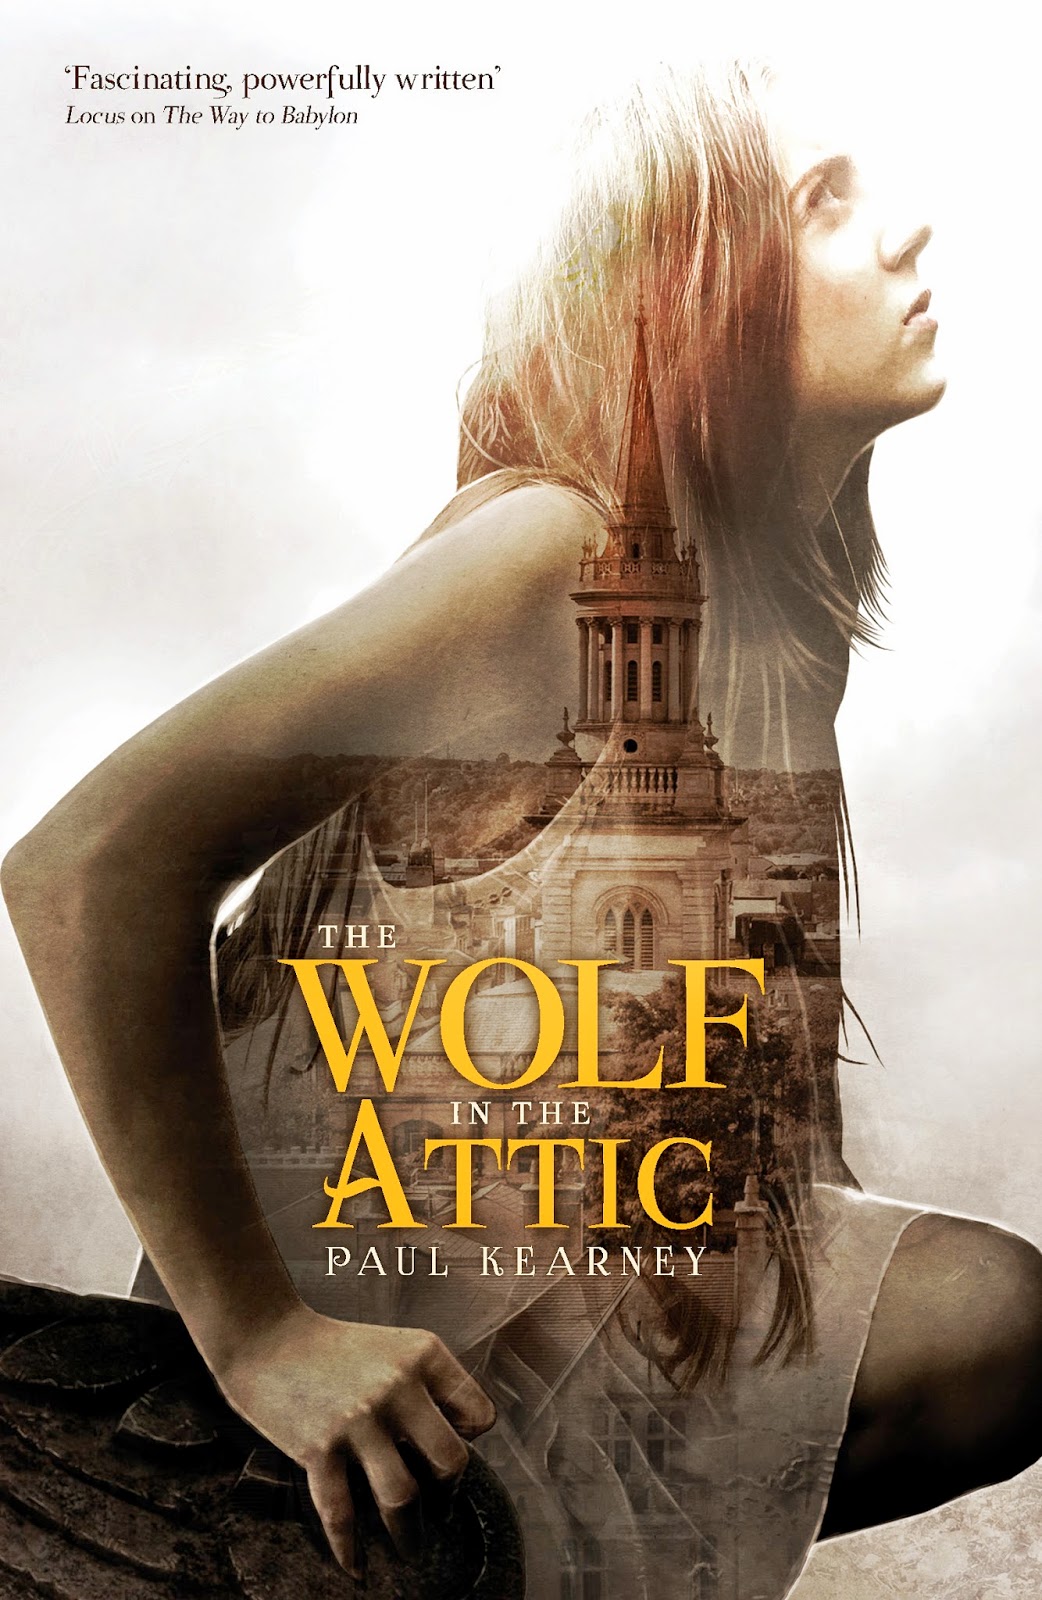 The Wolf in the Attic (Anna Francis, #1) by Paul Kearney